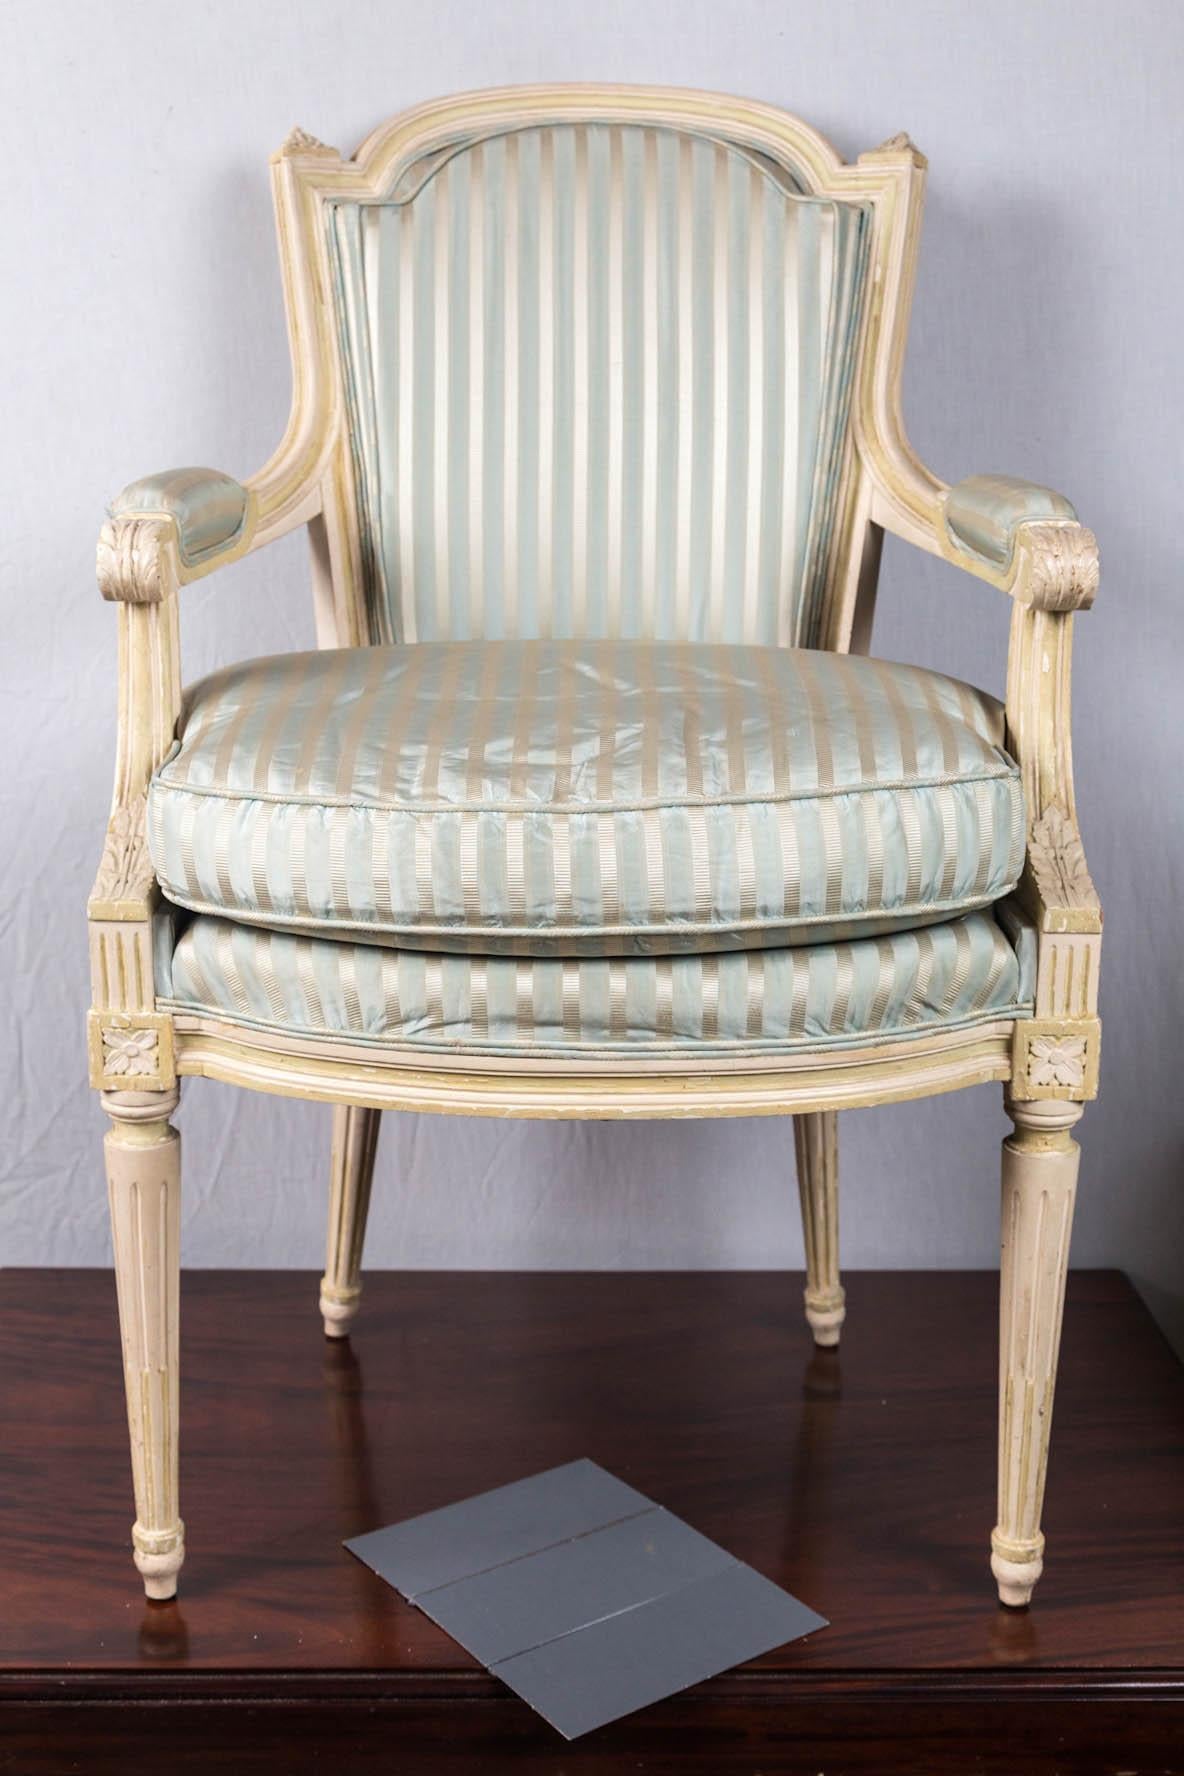 Of a small scale, with upholstered back and loose cushion. Rounded top rail, round tapered fluted legs. Decorated with typical Louis XVI elements and fluting.